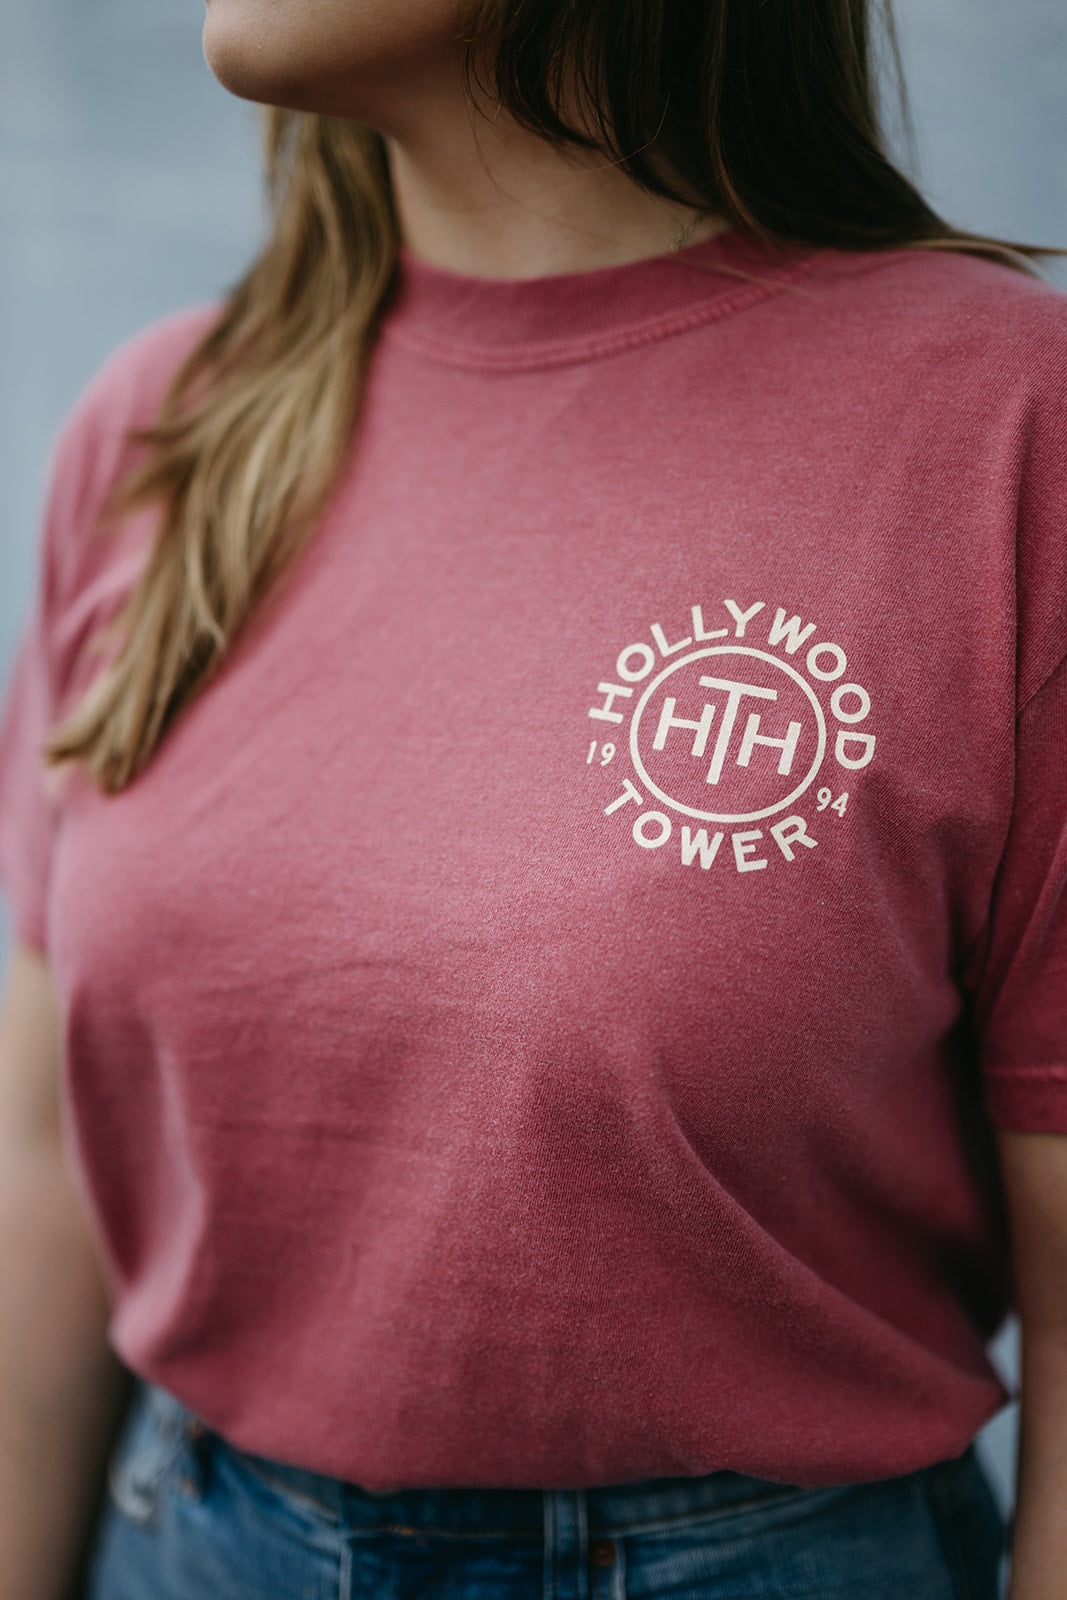 The Hollywood Tower Tee